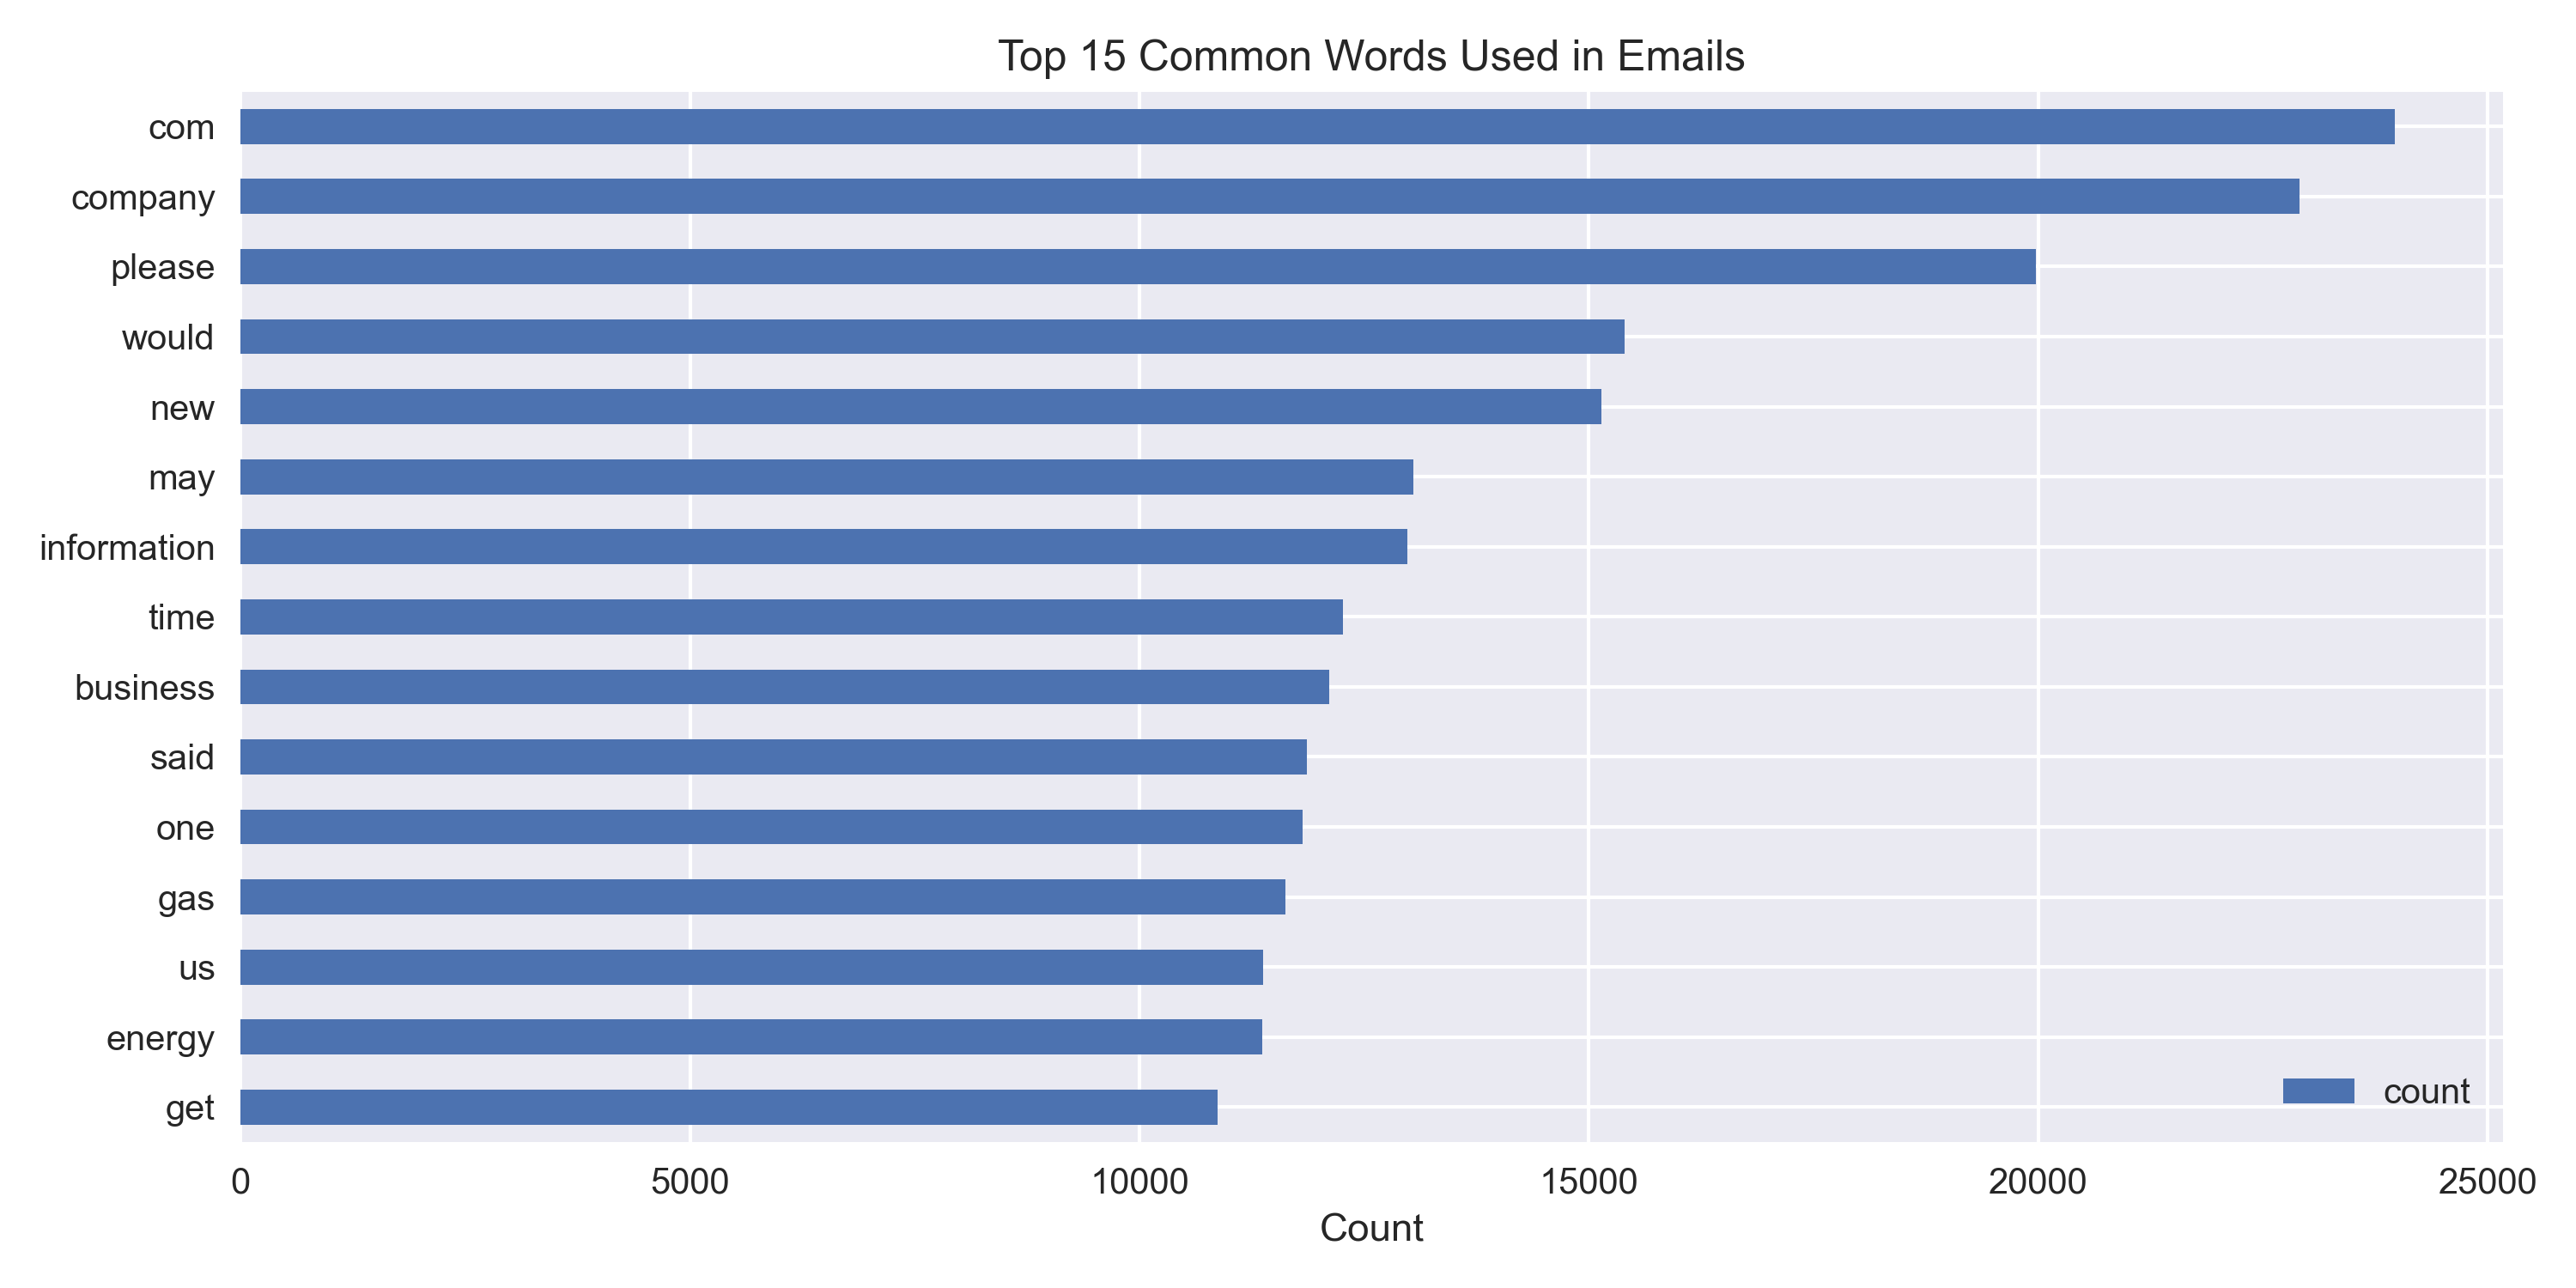 Top 15 Common Words Used in Emails